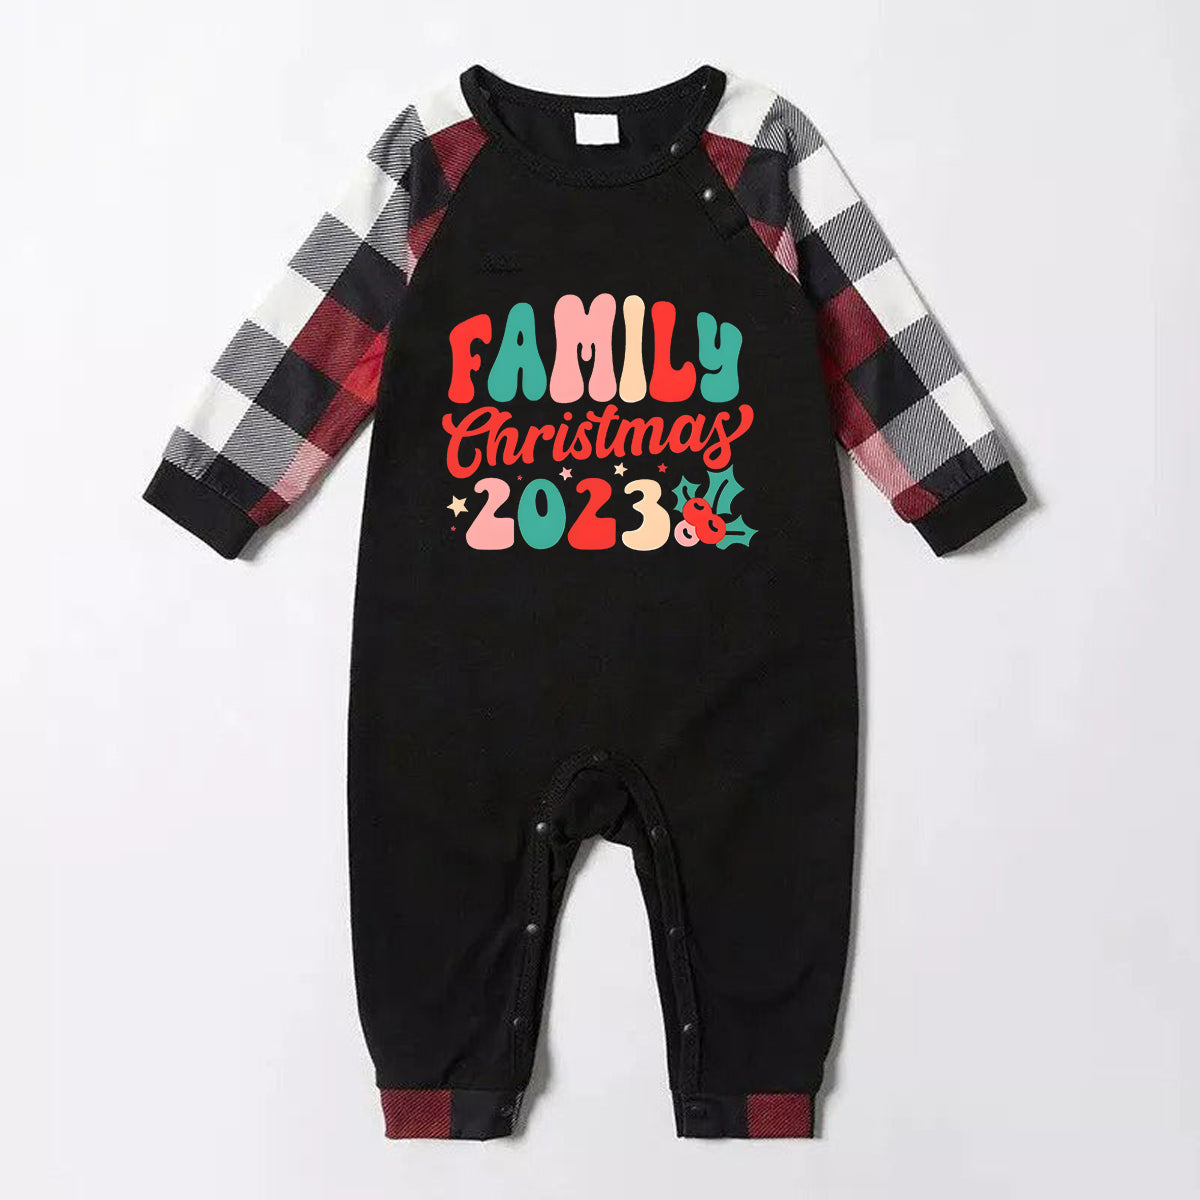 Christmas ‘ Family Christmas 2023’ Letter Print Patterned Casual Long Sleeve Sweatshirts Contrast Tops and Red & Black & White Plaid Pants Family Matching Pajamas Set With Dog Bandana